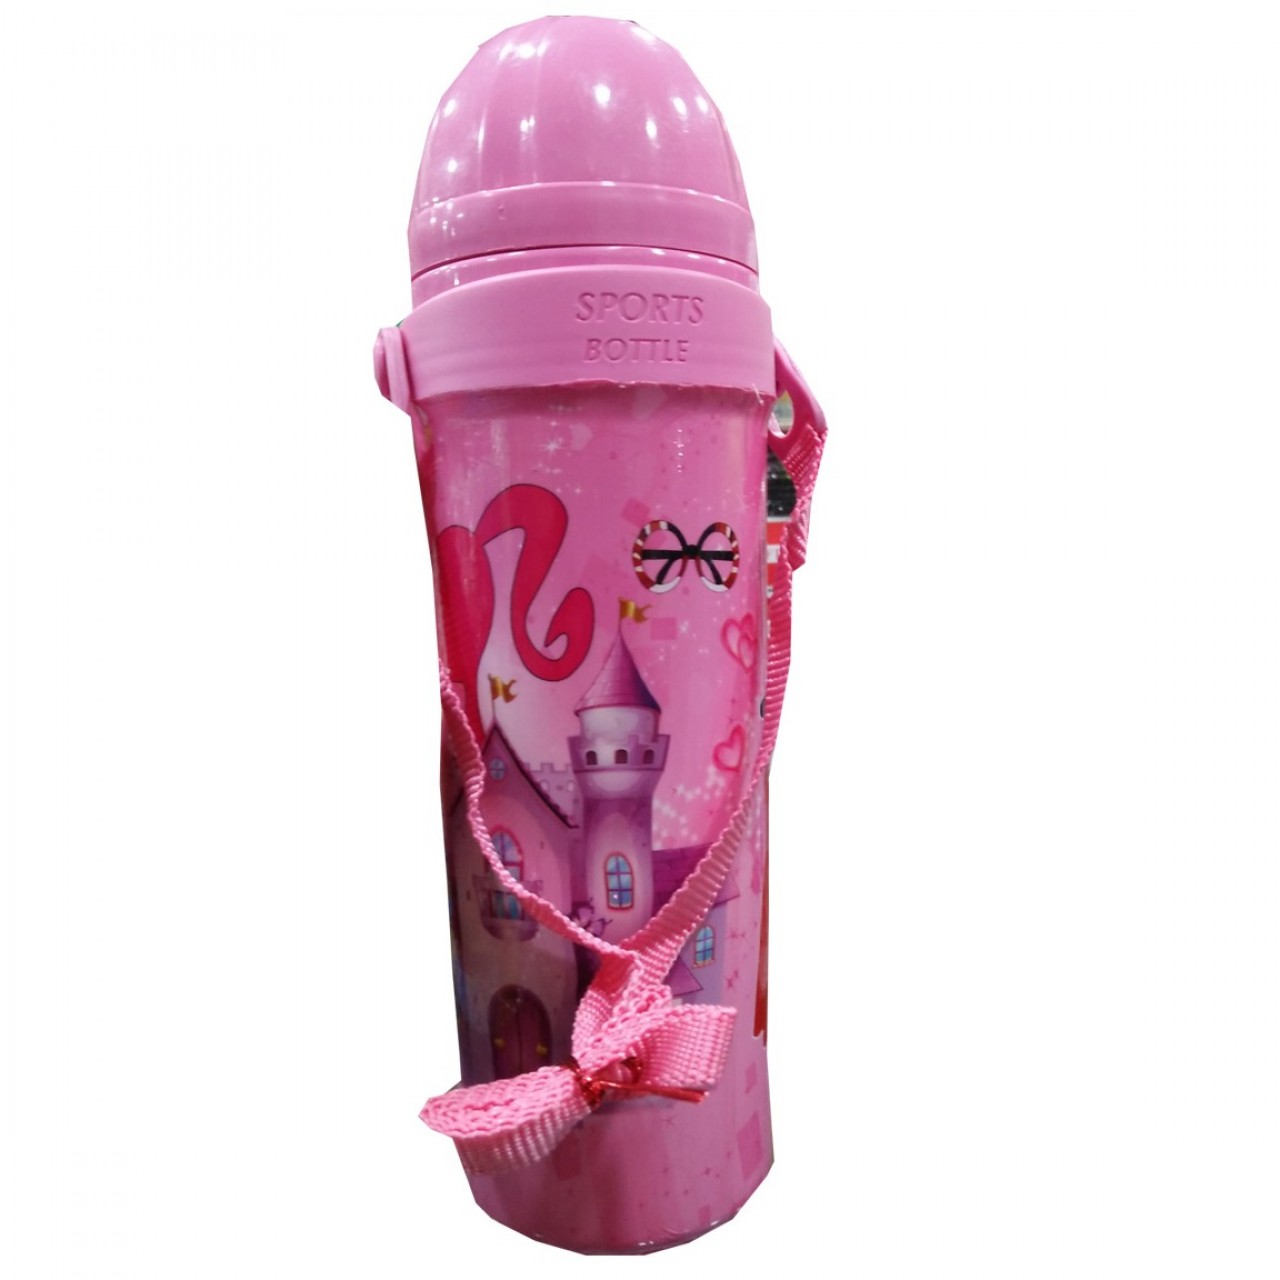 Sports Water Bottle for Girls - Pink